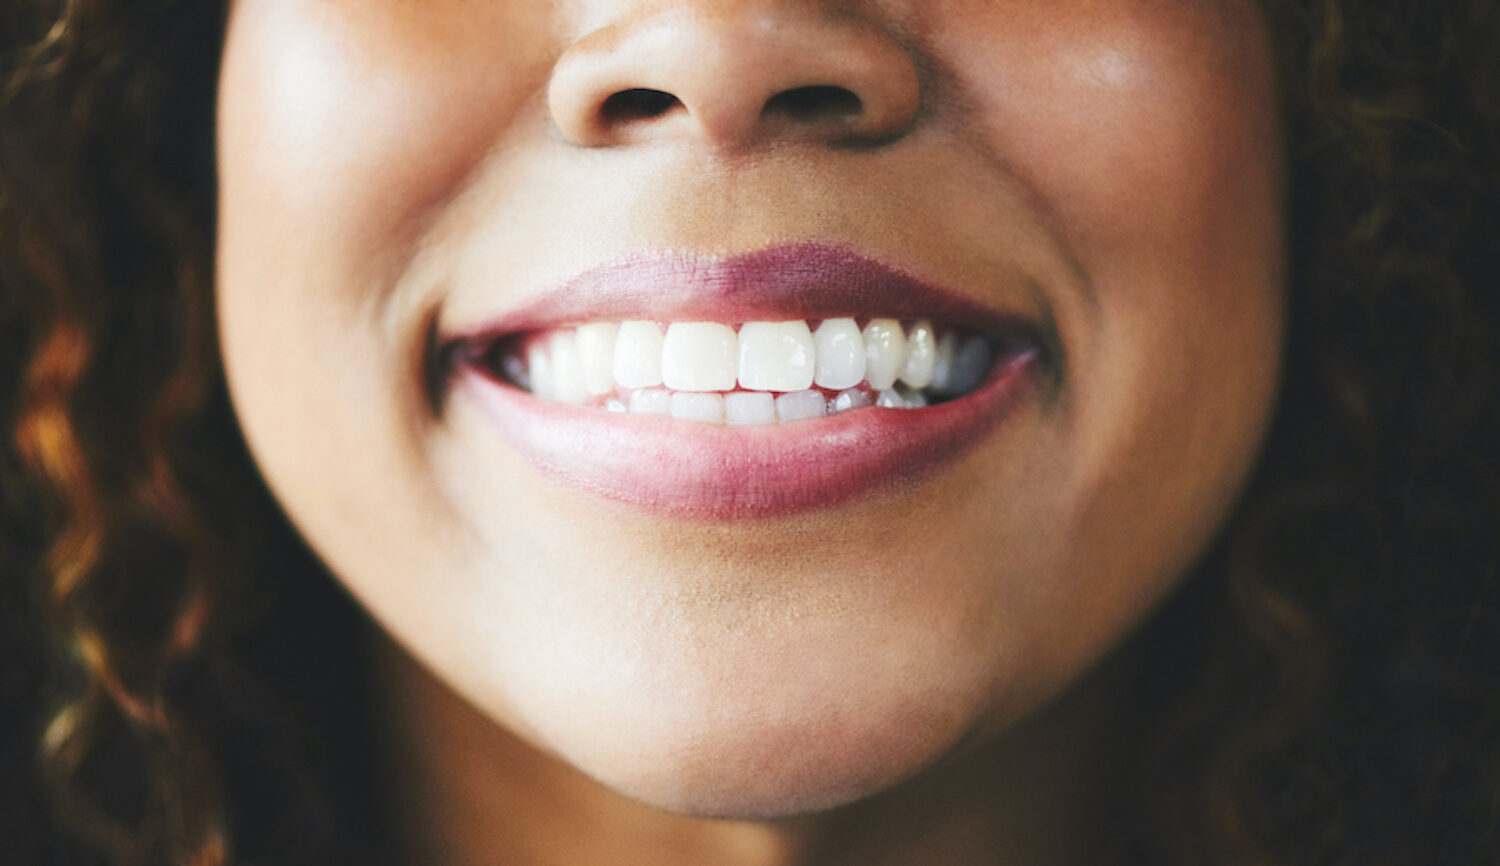 Closeup of a Black woman's smile after a smile makeover